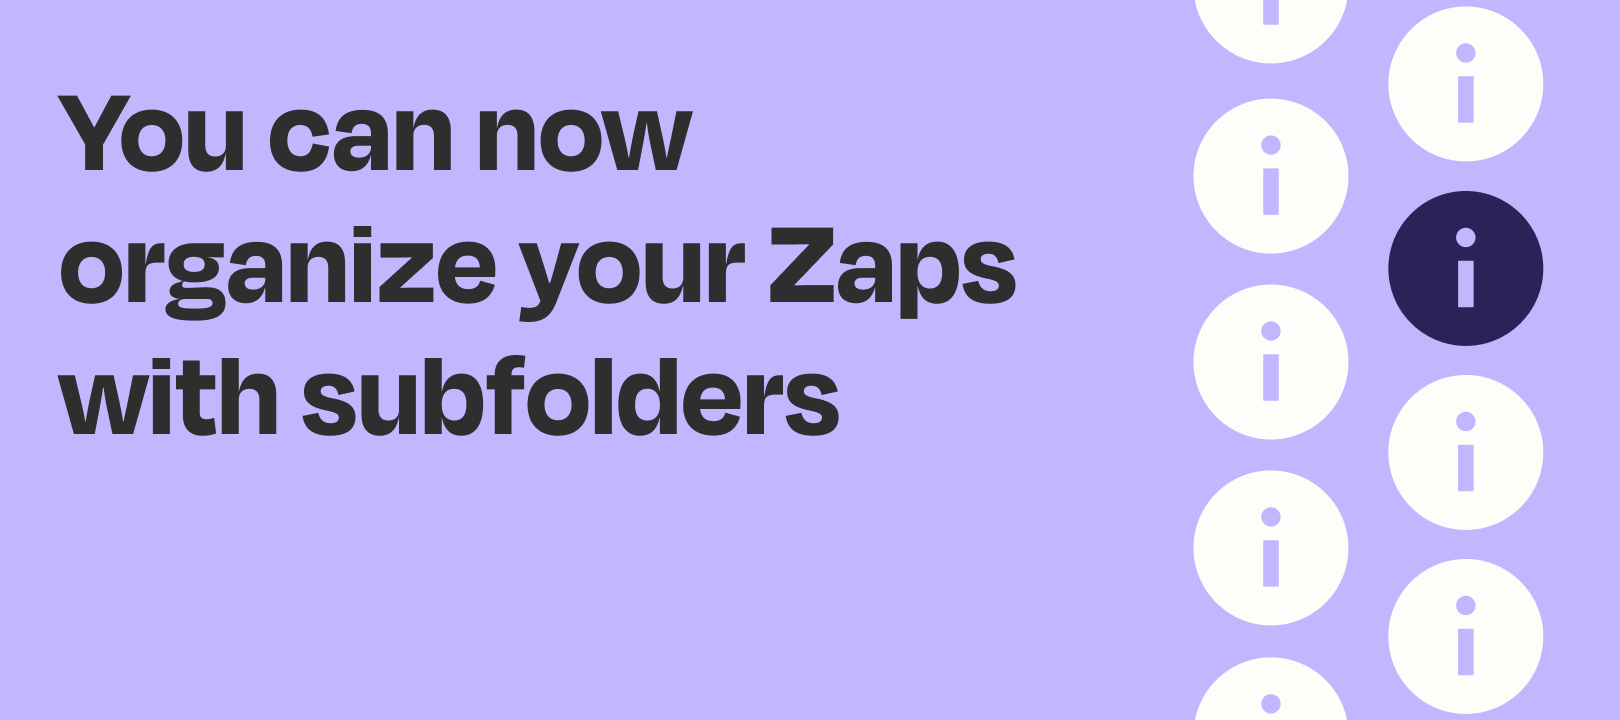 You can now create subfolders to better organize your Zaps!